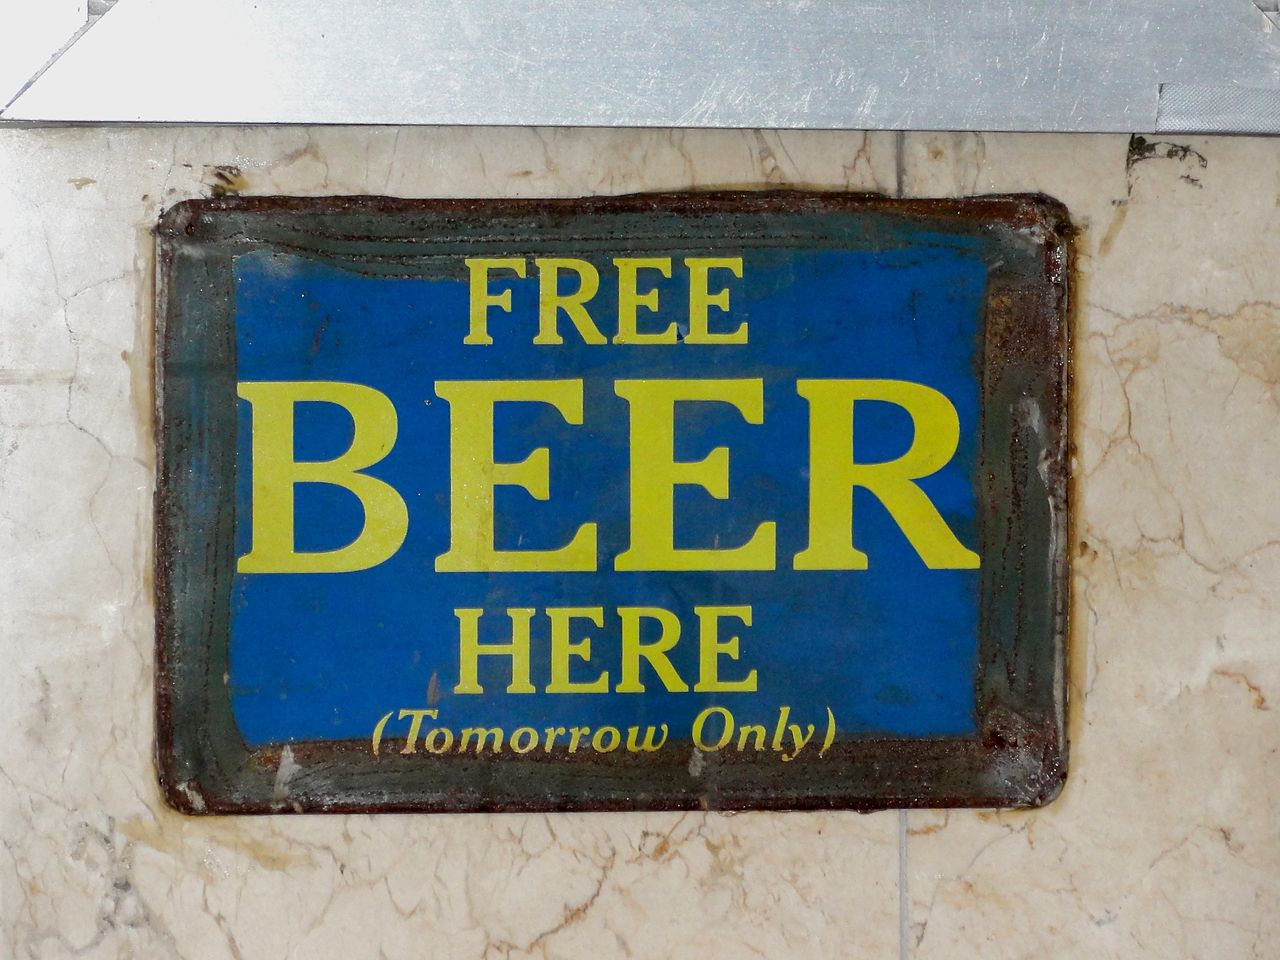 Free Beer Here (tomorrow only)